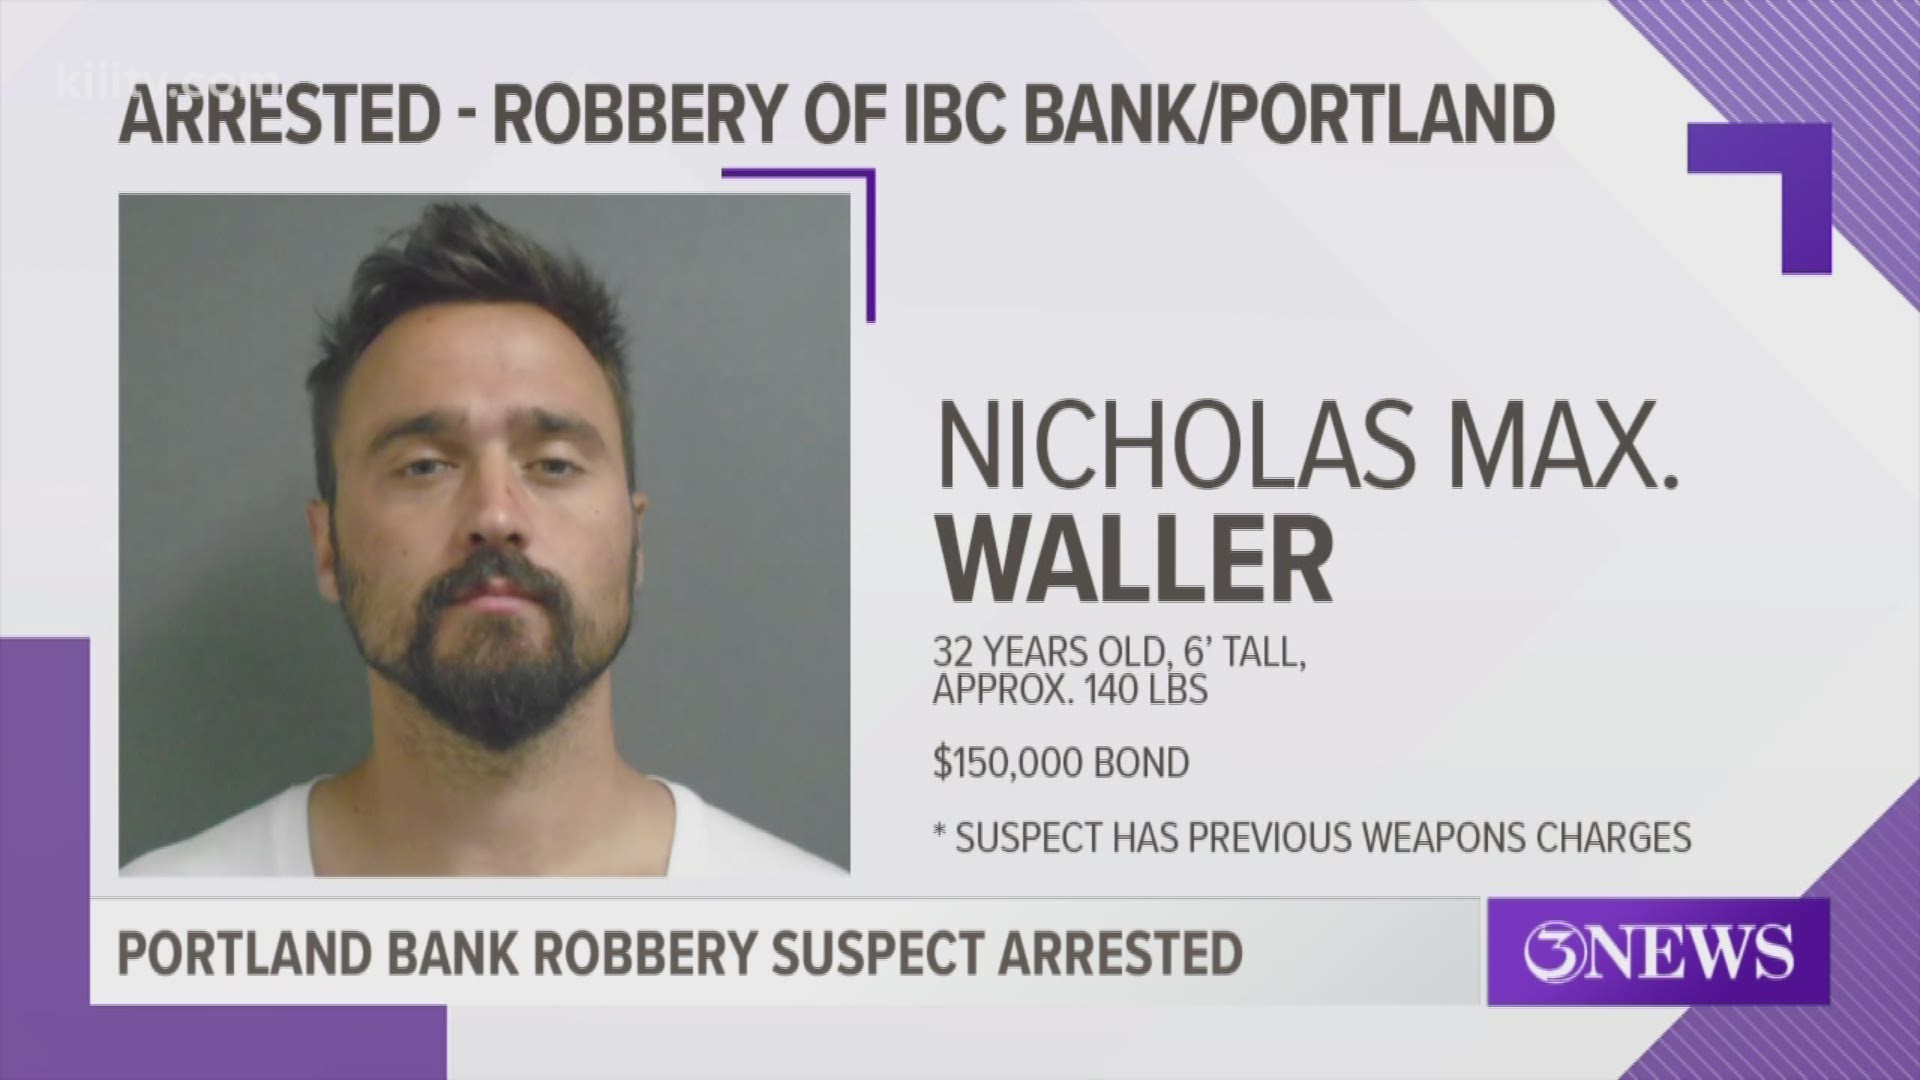 A 32-year-old man has been arrested in connection to a recent robbery at the IBC Bank in Portland, Texas.